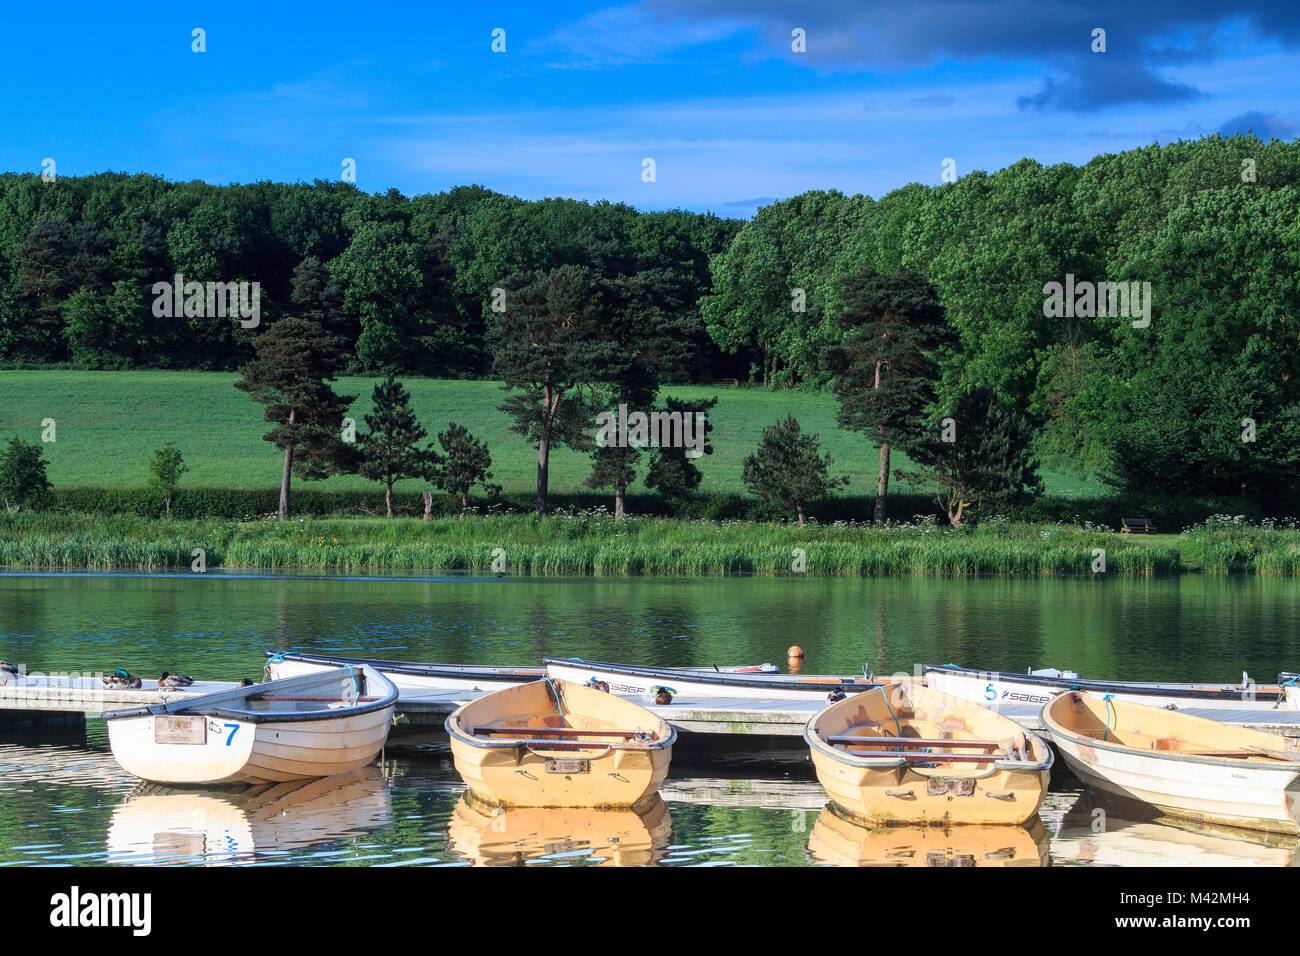 An image of rowing boats for hire at Thornton Reservoir, Leicestershire, England, UK Stock Photo